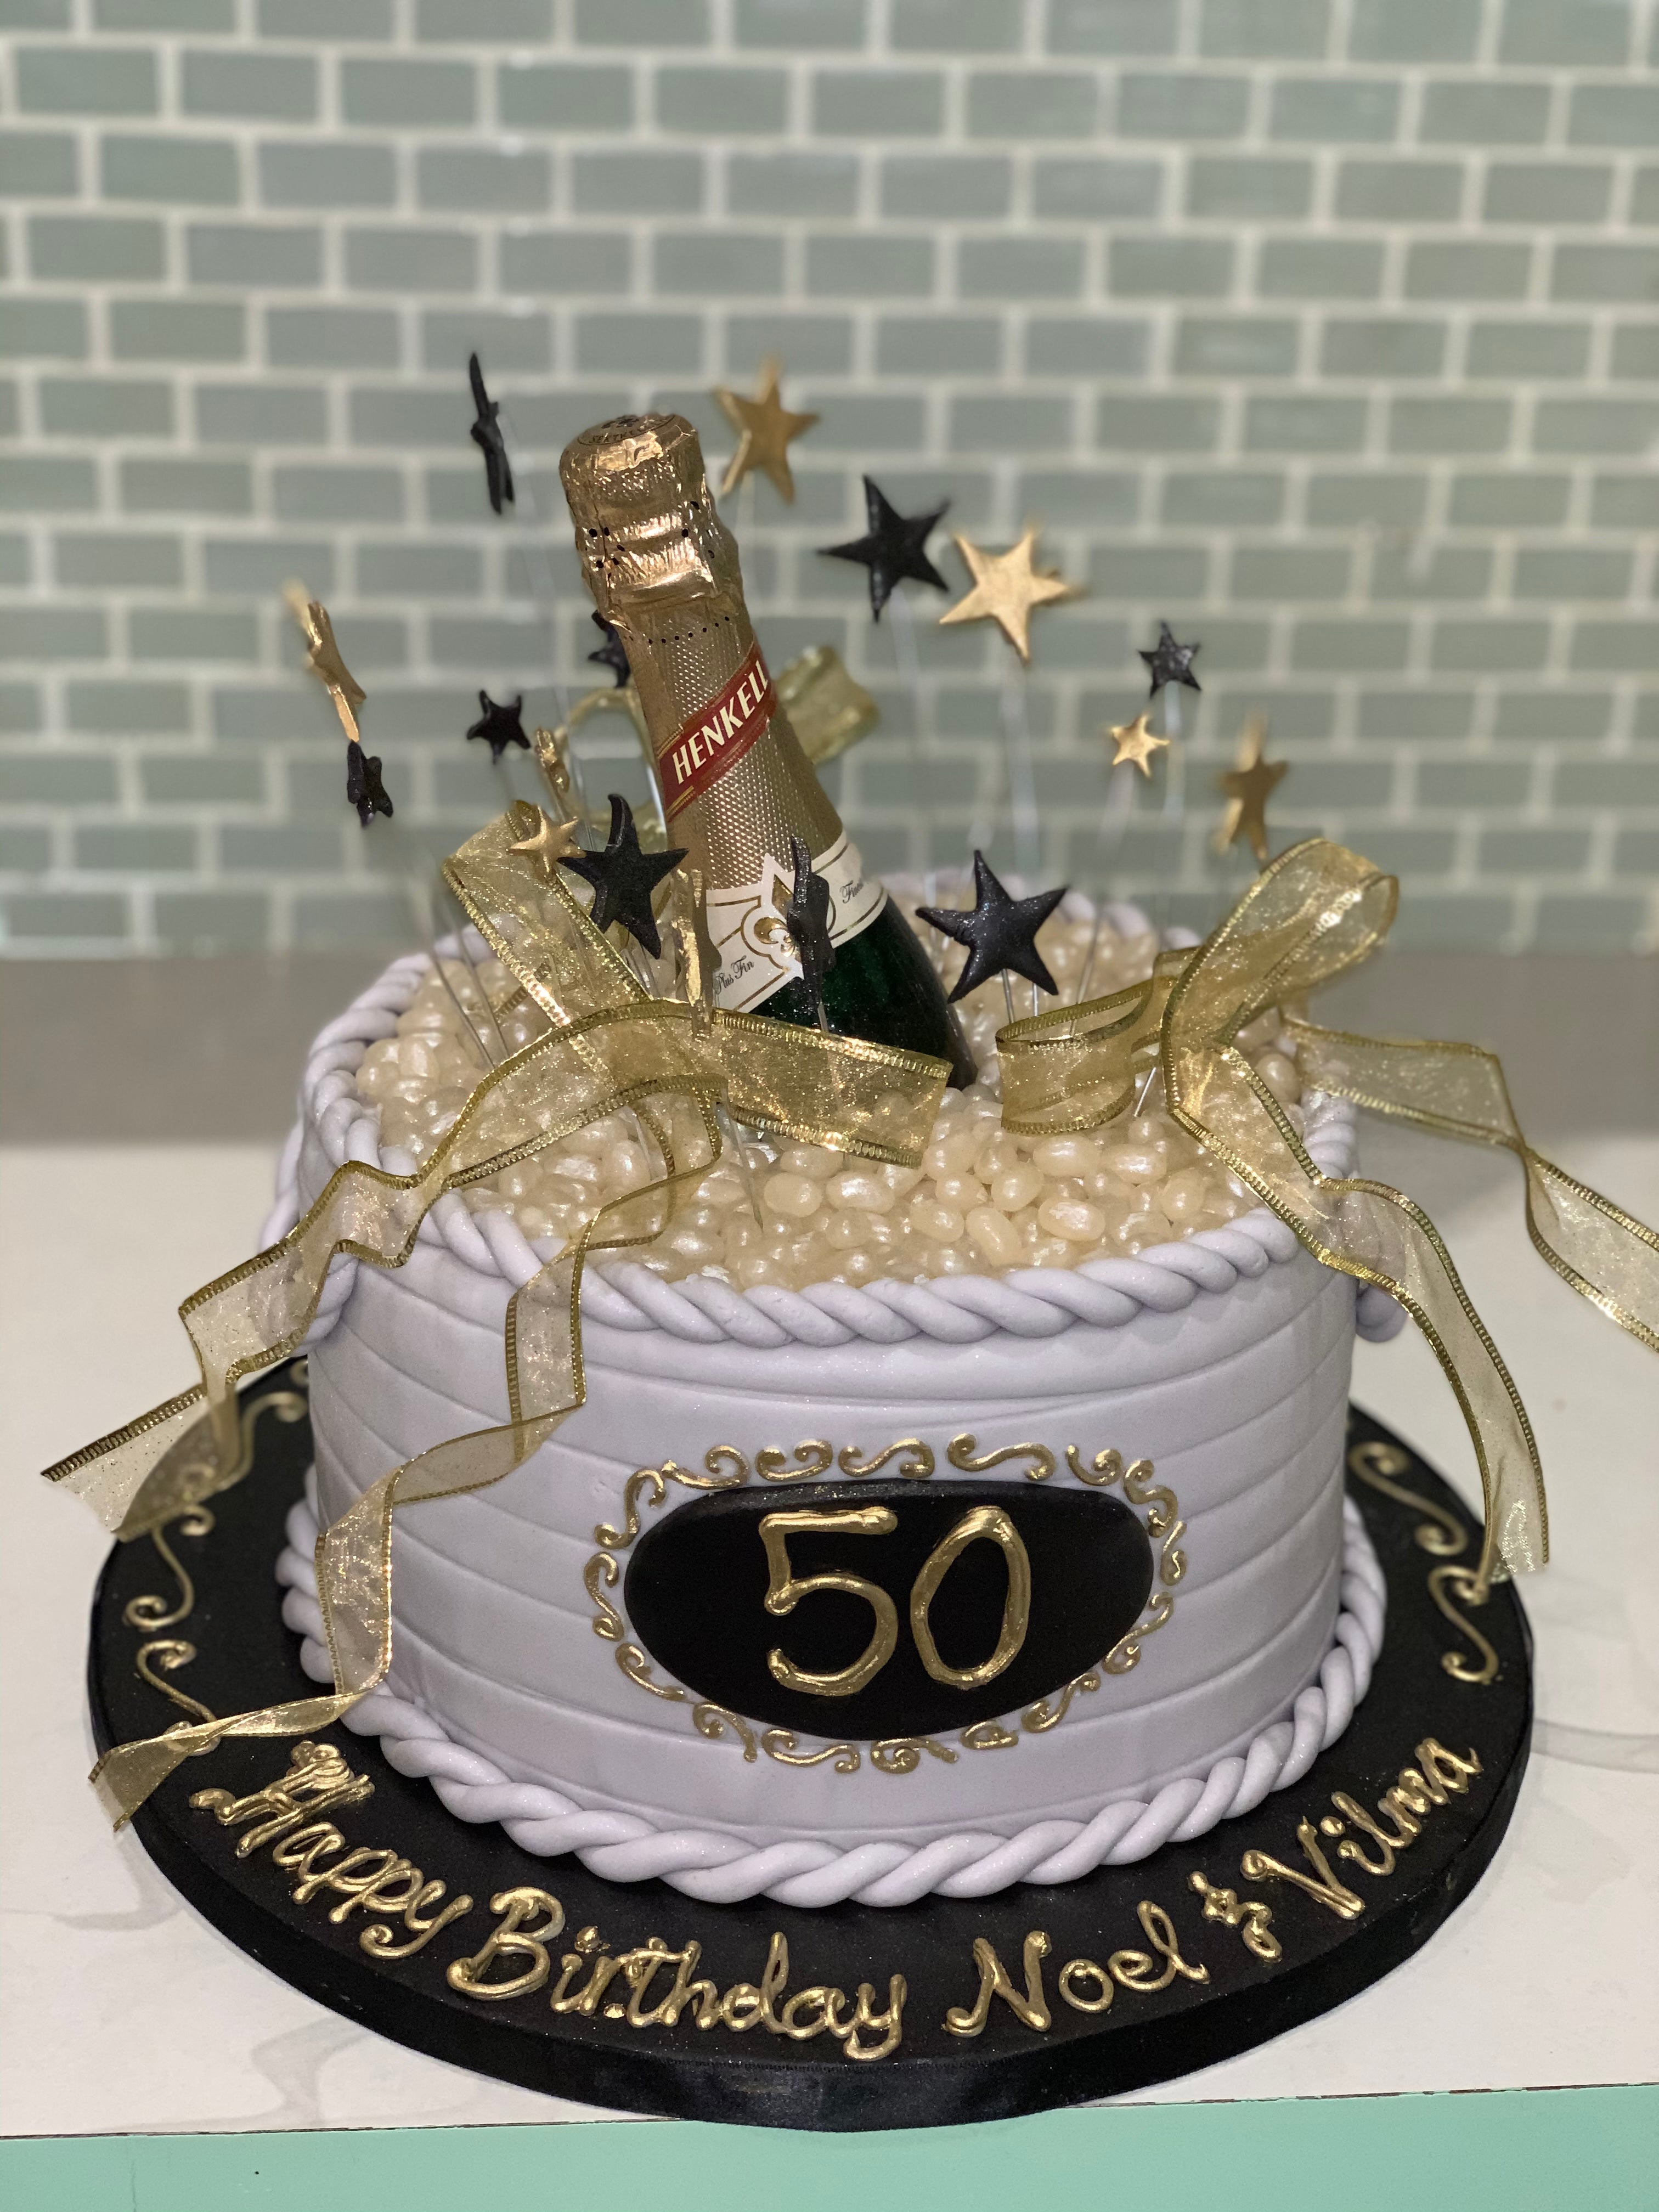 50 Years Cake Topper - 50th Birthday or Anniversary Cake Topper